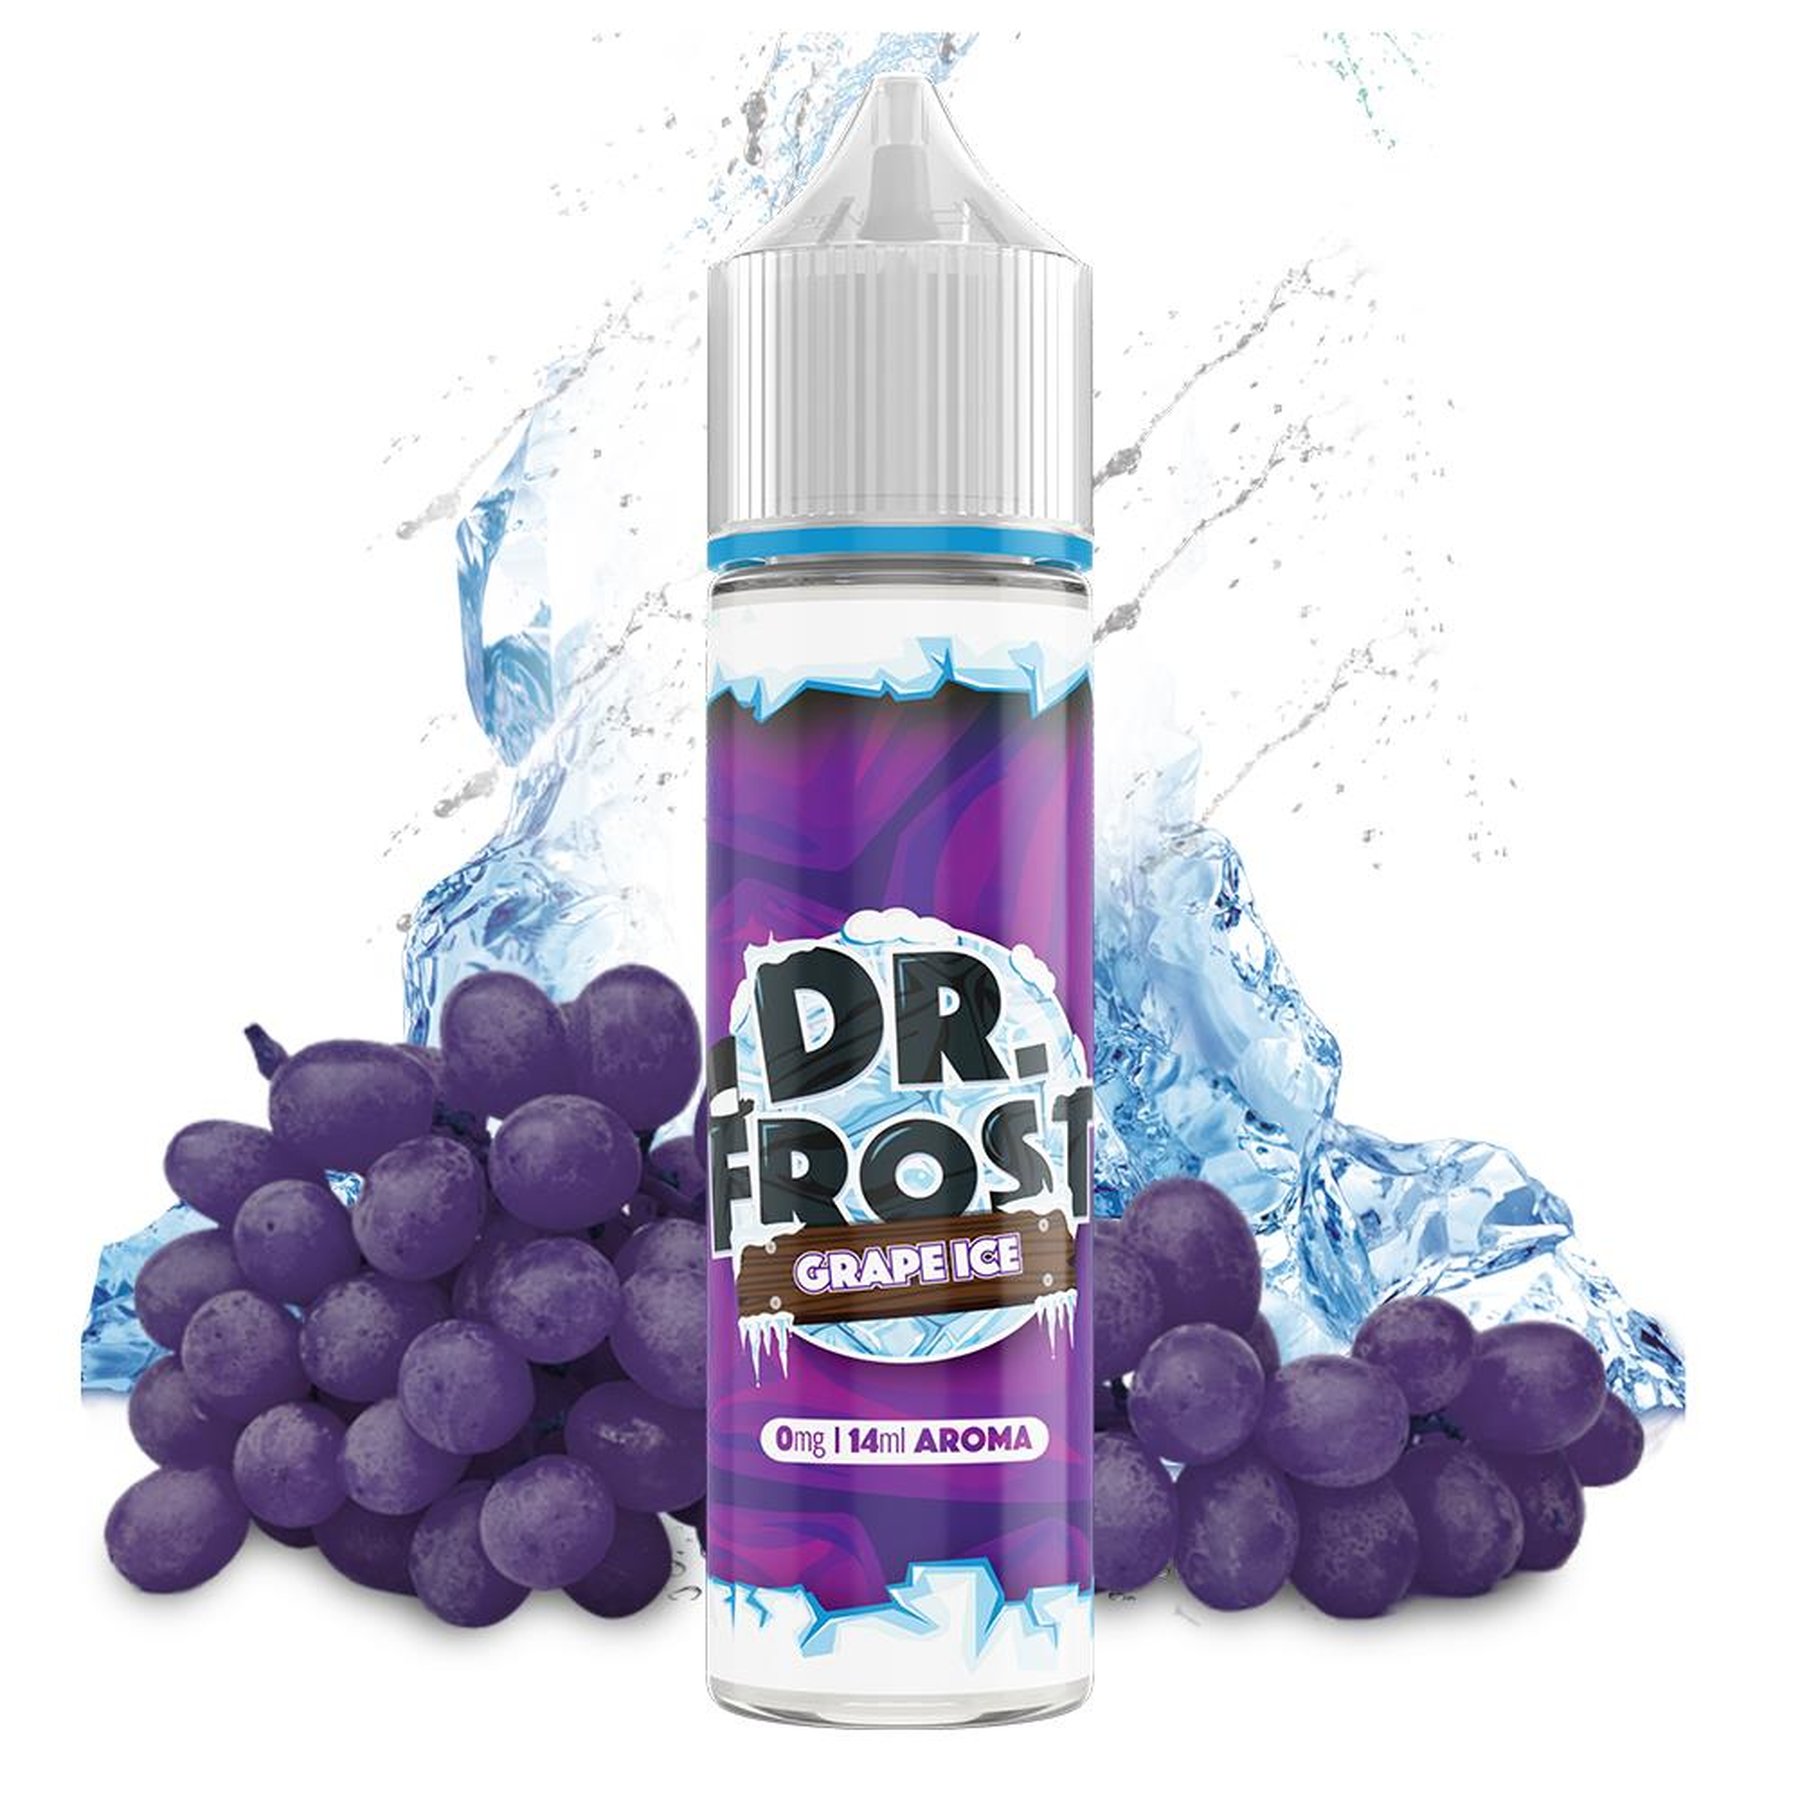 Dr. Frost Grape Ice Longfill 14ml